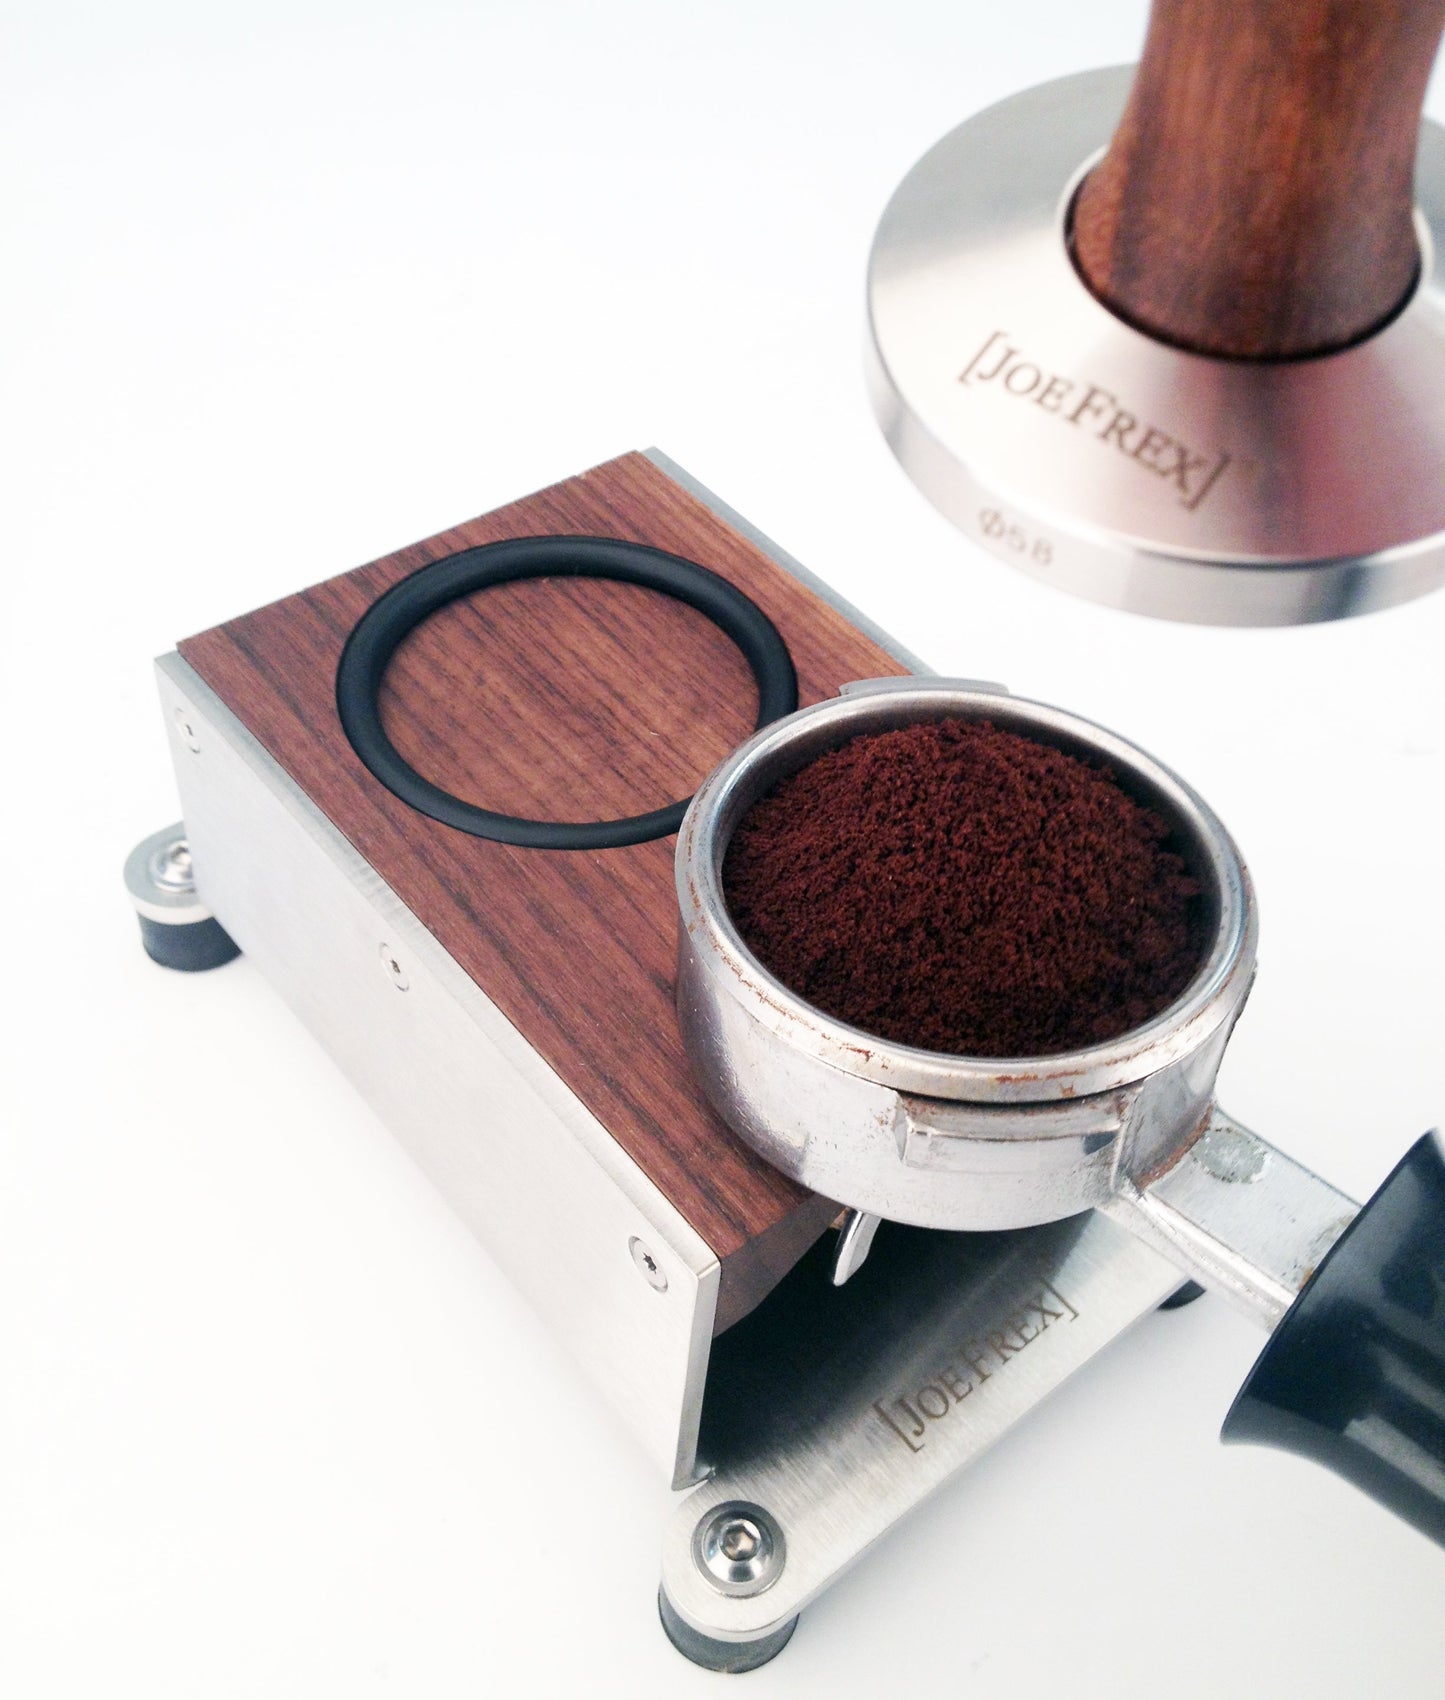 Tamping station walnut is a portafilter holder and a stand for your espresso tamper.  The perfect barista tool.